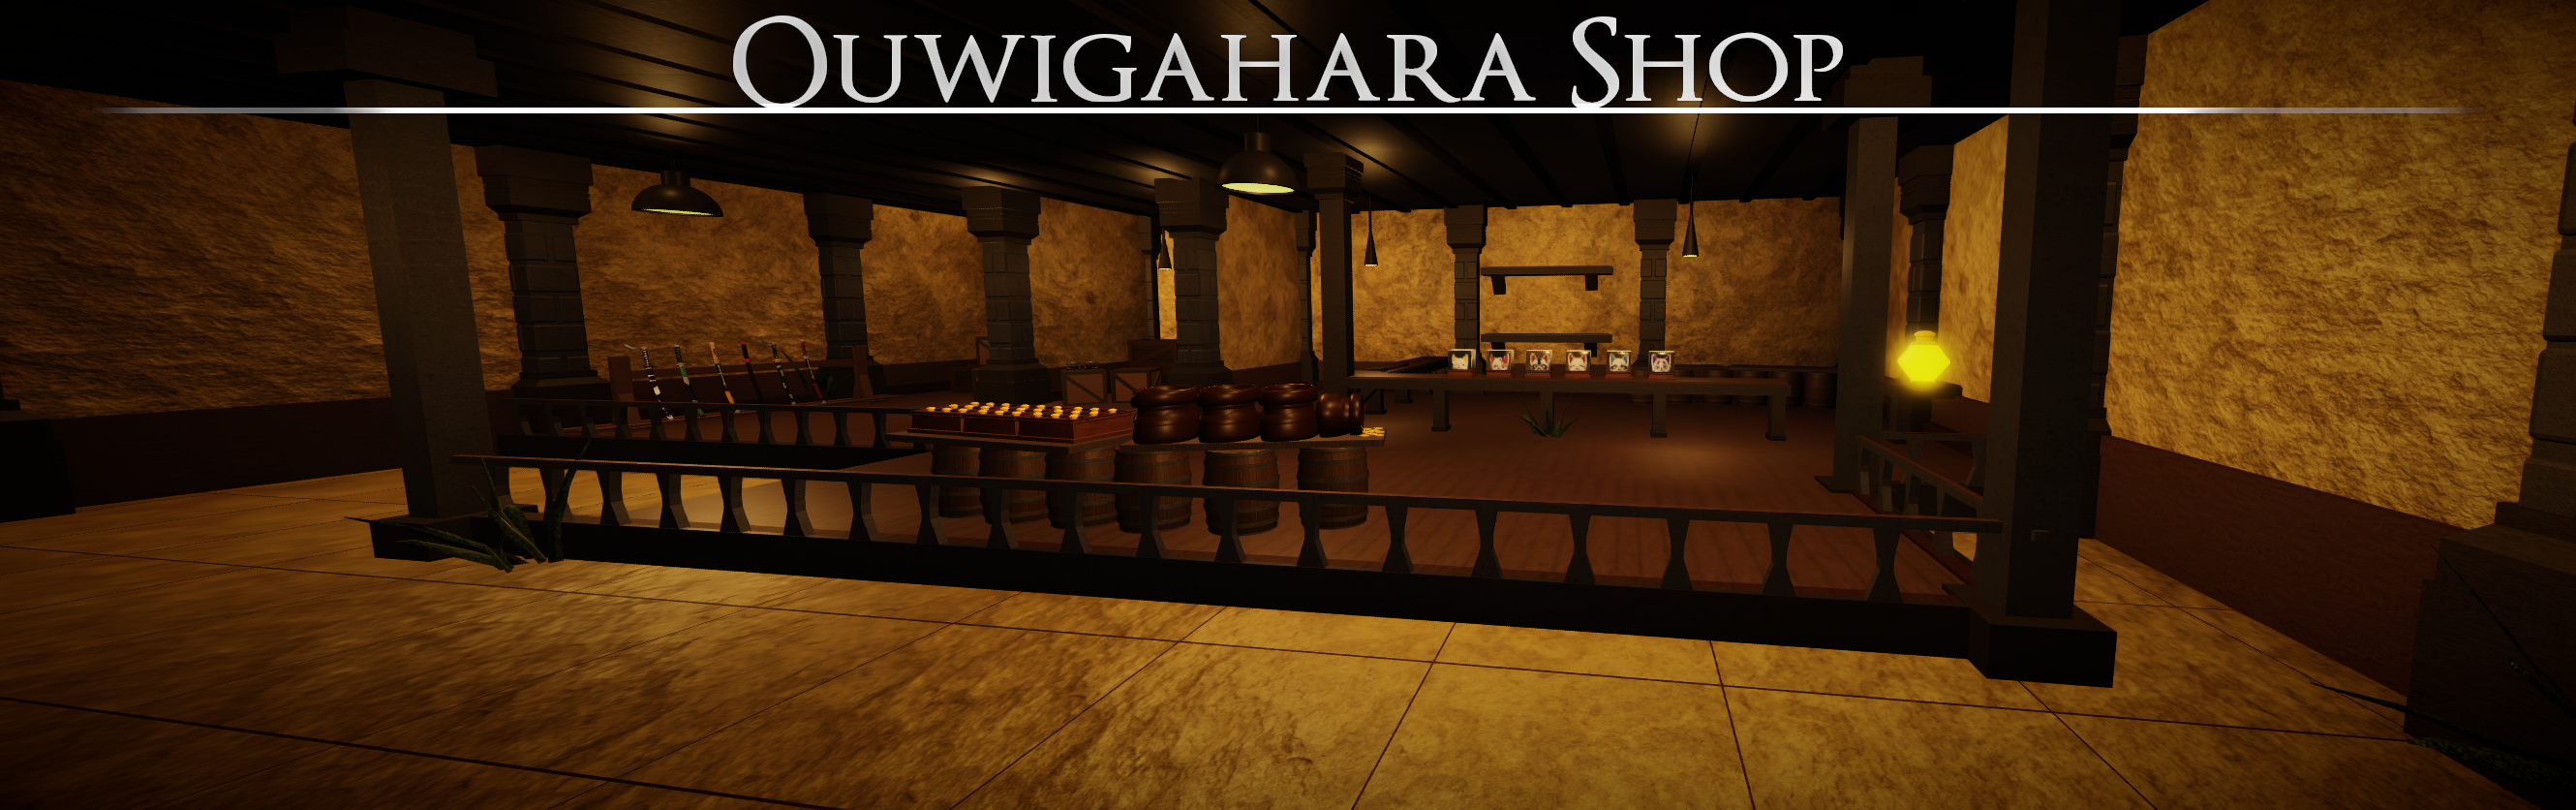 Project Slayers: Ouwigahara Dungeon Shop Guide